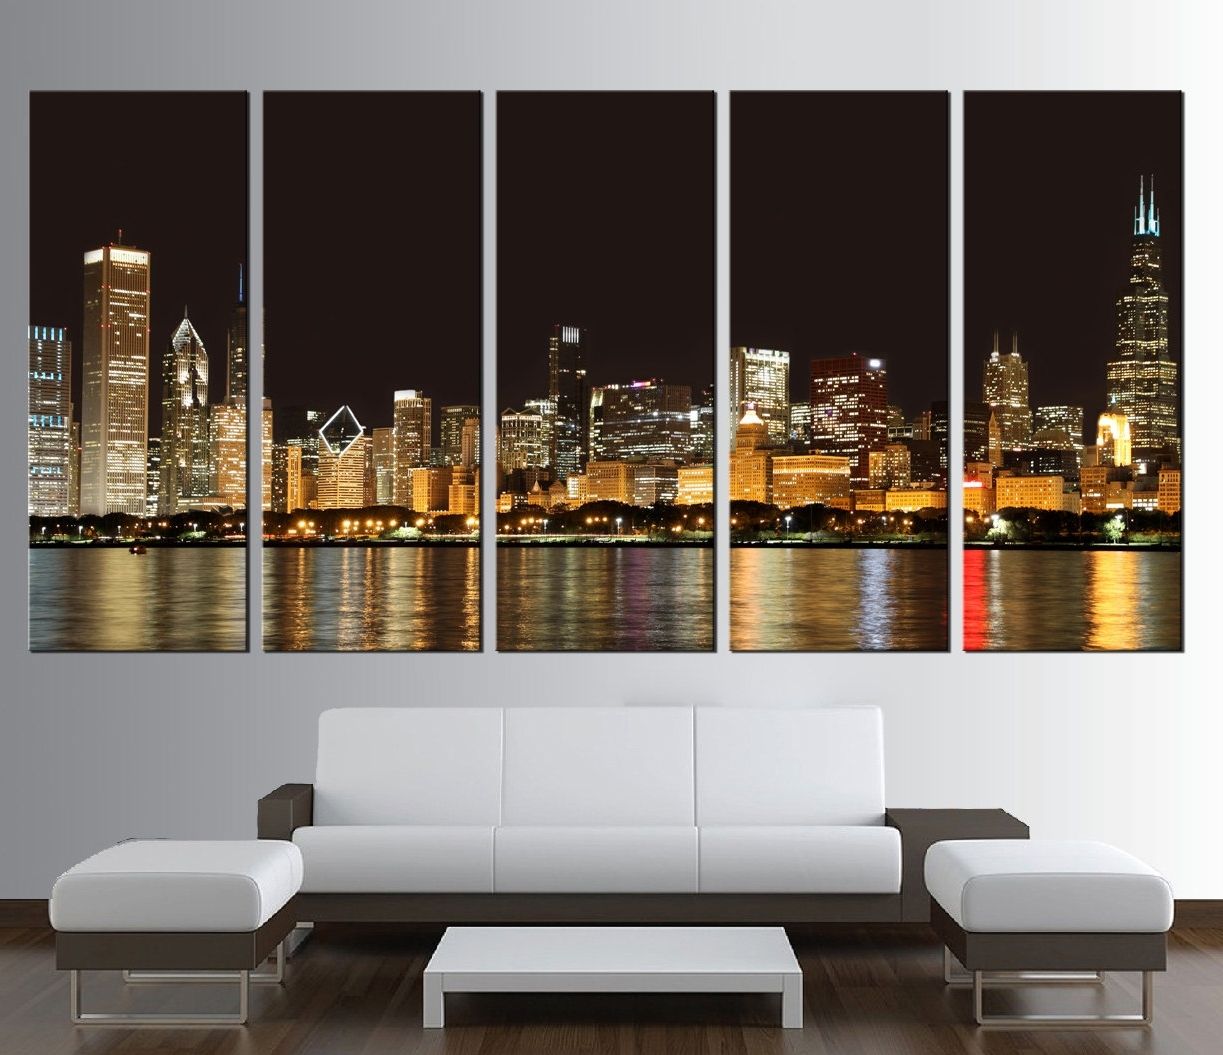 Huge Wall Art Within Favorite Wall Art Design: Extra Large Wall Art Rectangle Black Gold (View 7 of 15)